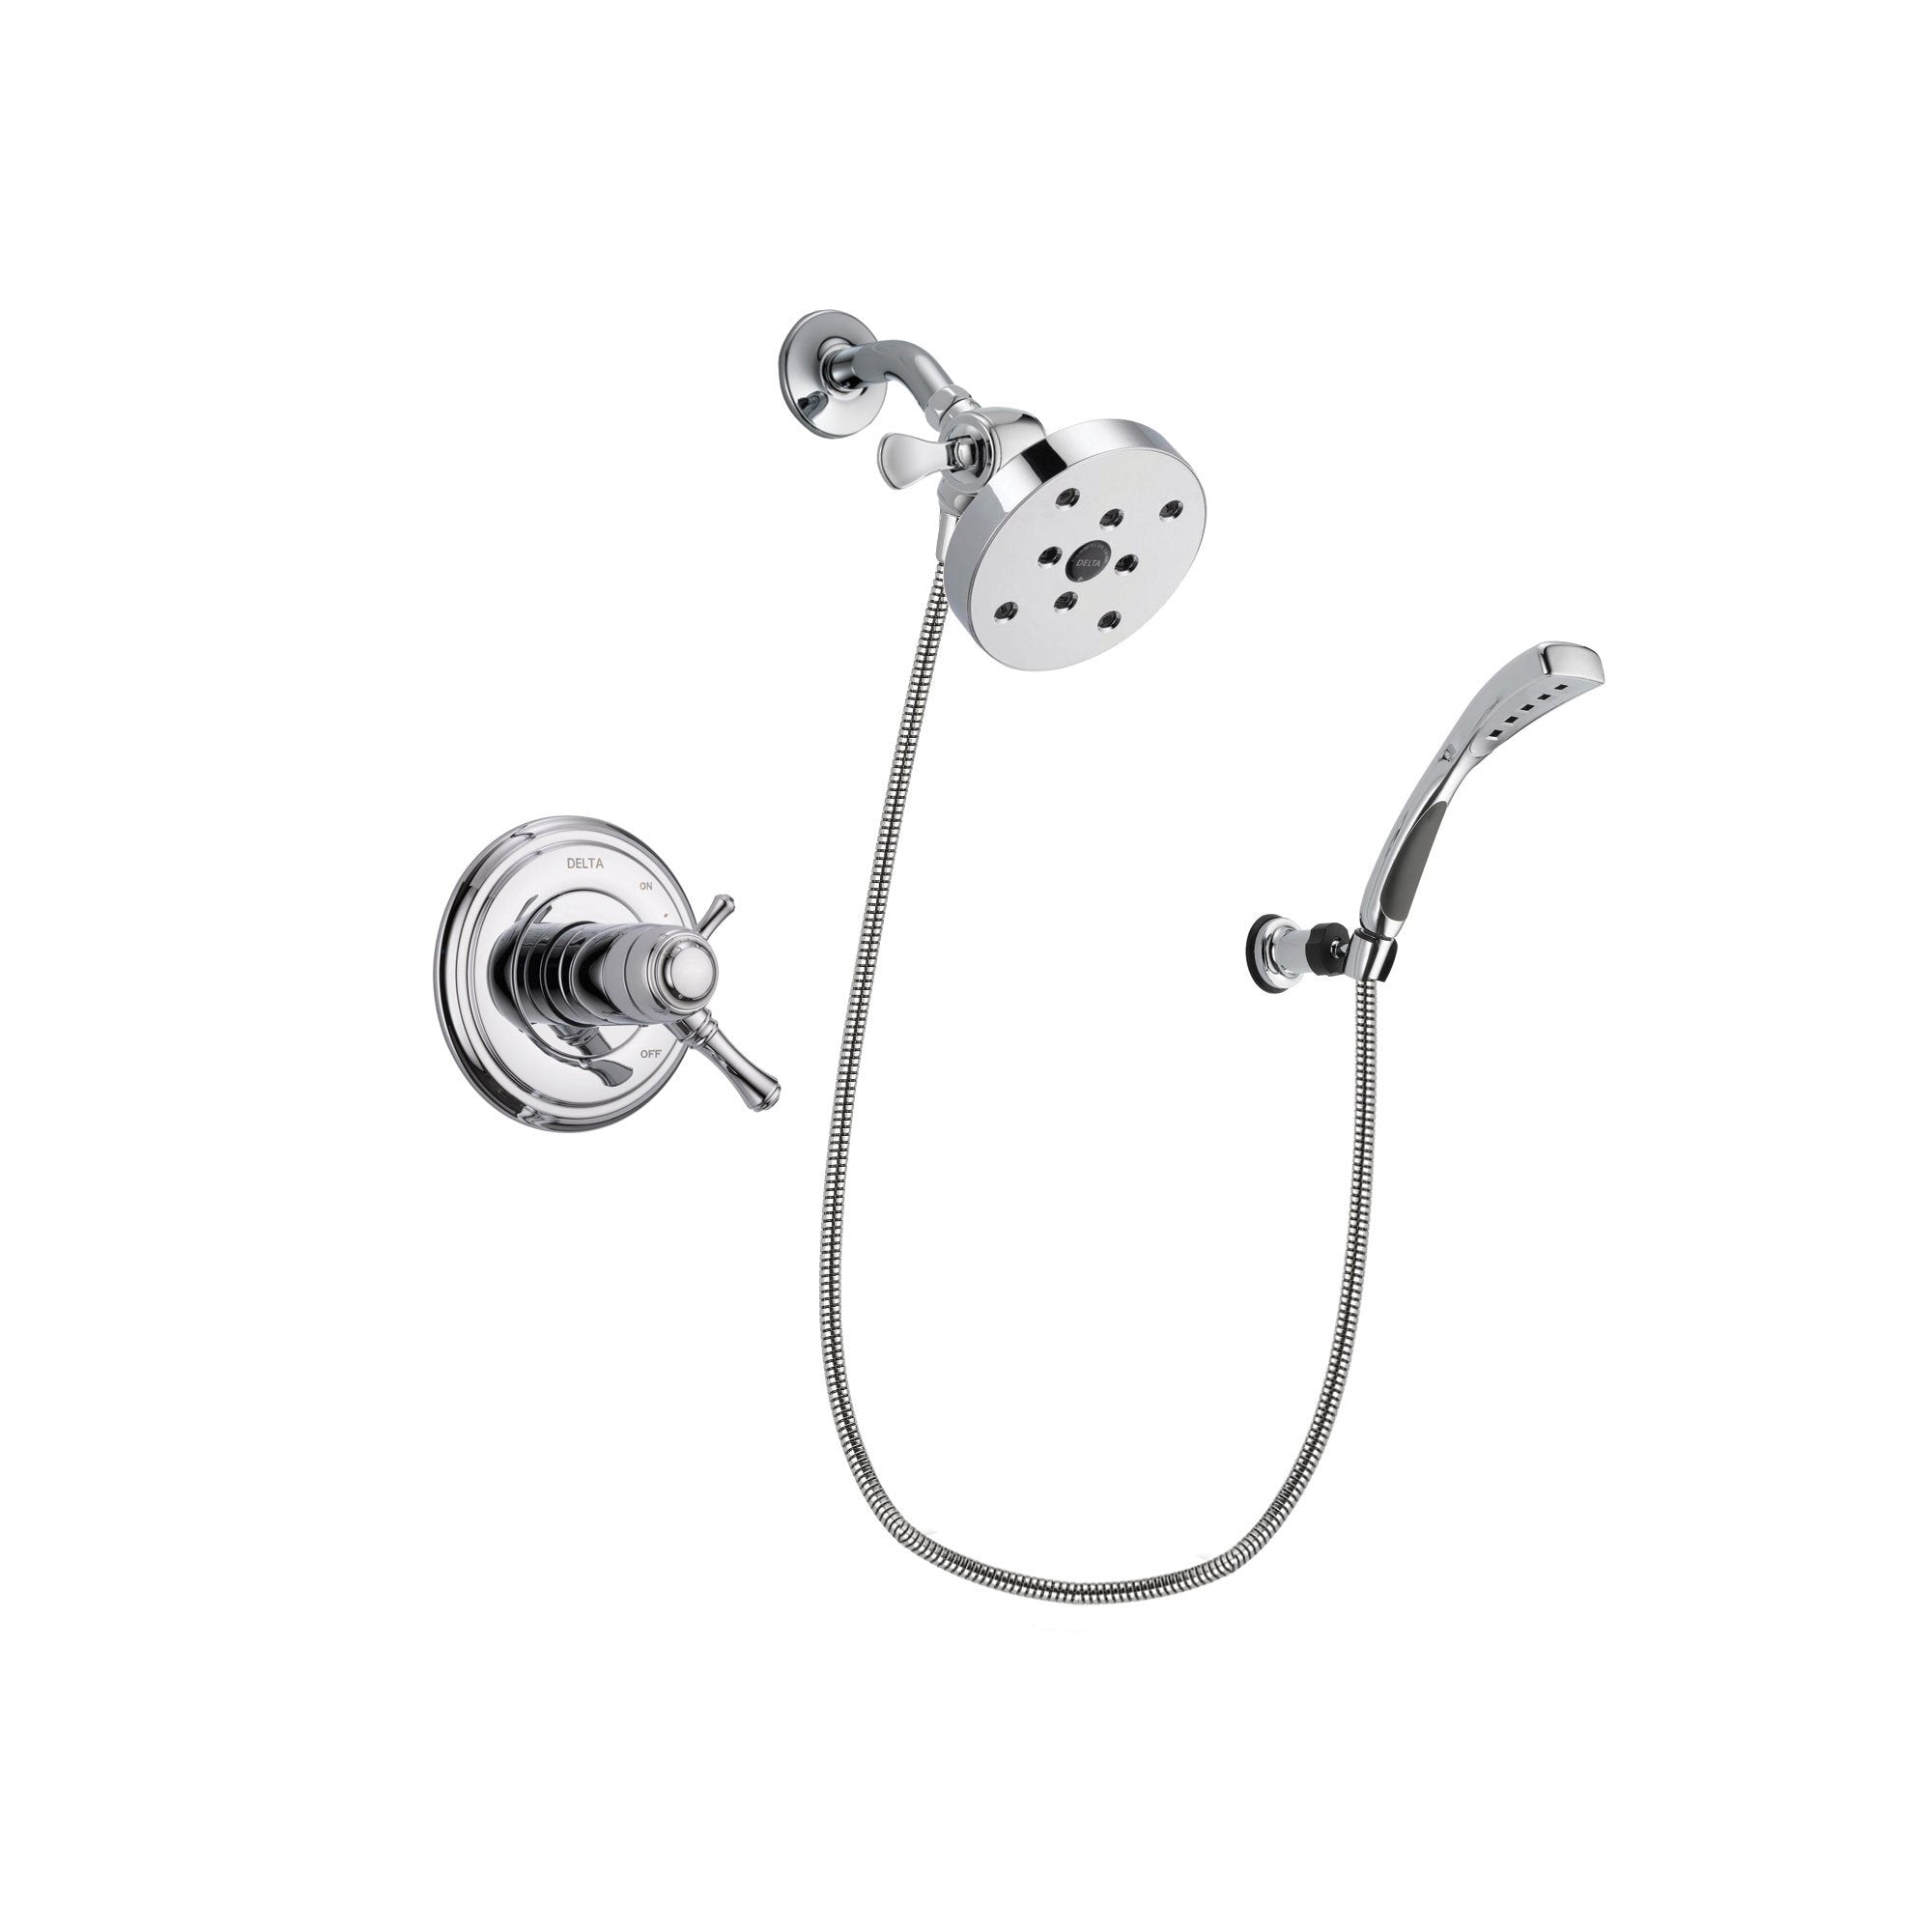 Delta Cassidy Chrome Finish Thermostatic Shower Faucet System Package with 5-1/2 inch Shower Head and Wall-Mount Bracket with Handheld Shower Spray Includes Rough-in Valve DSP1080V